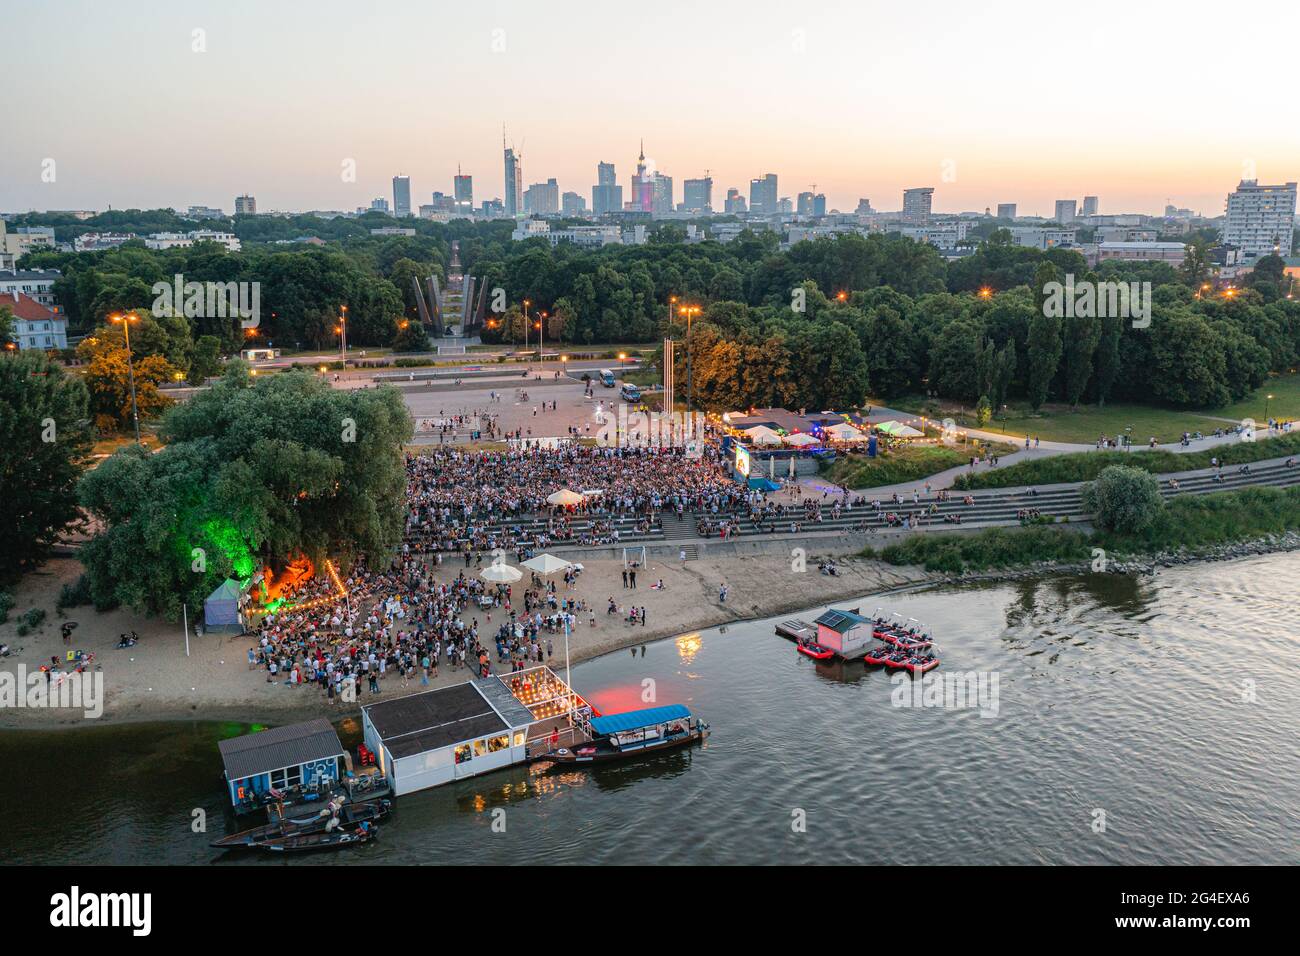 Euro 2020 fan zone, fans watching footbal match between Poland and Spain on large screen Stock Photo